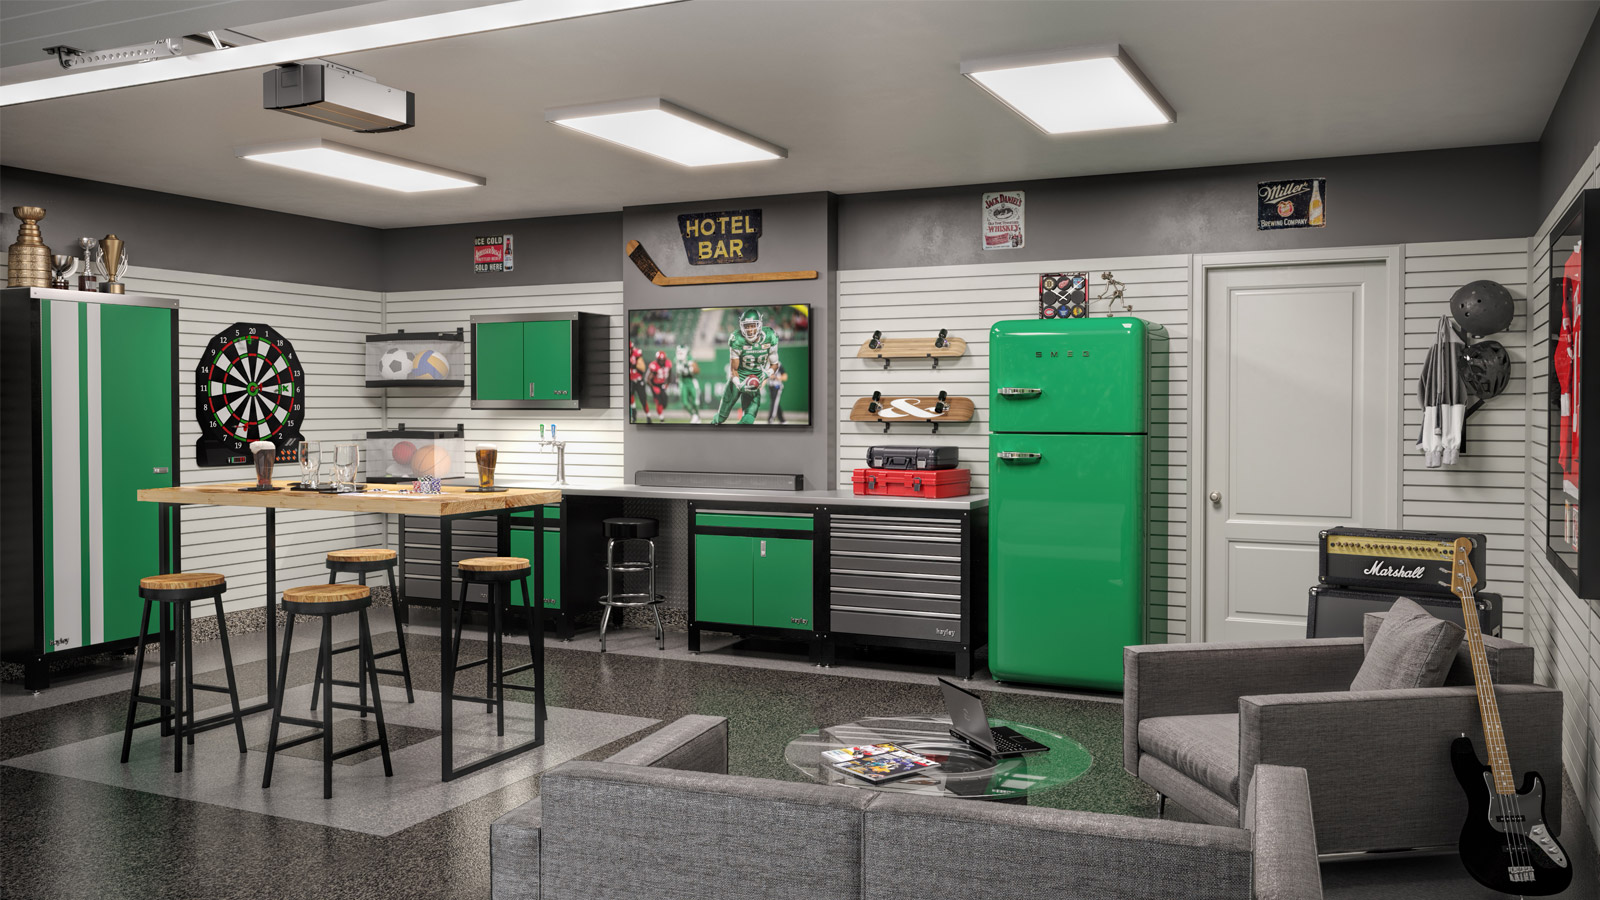 The power of the rebrand: Autobox Garage Interiors - Rock and Bloom